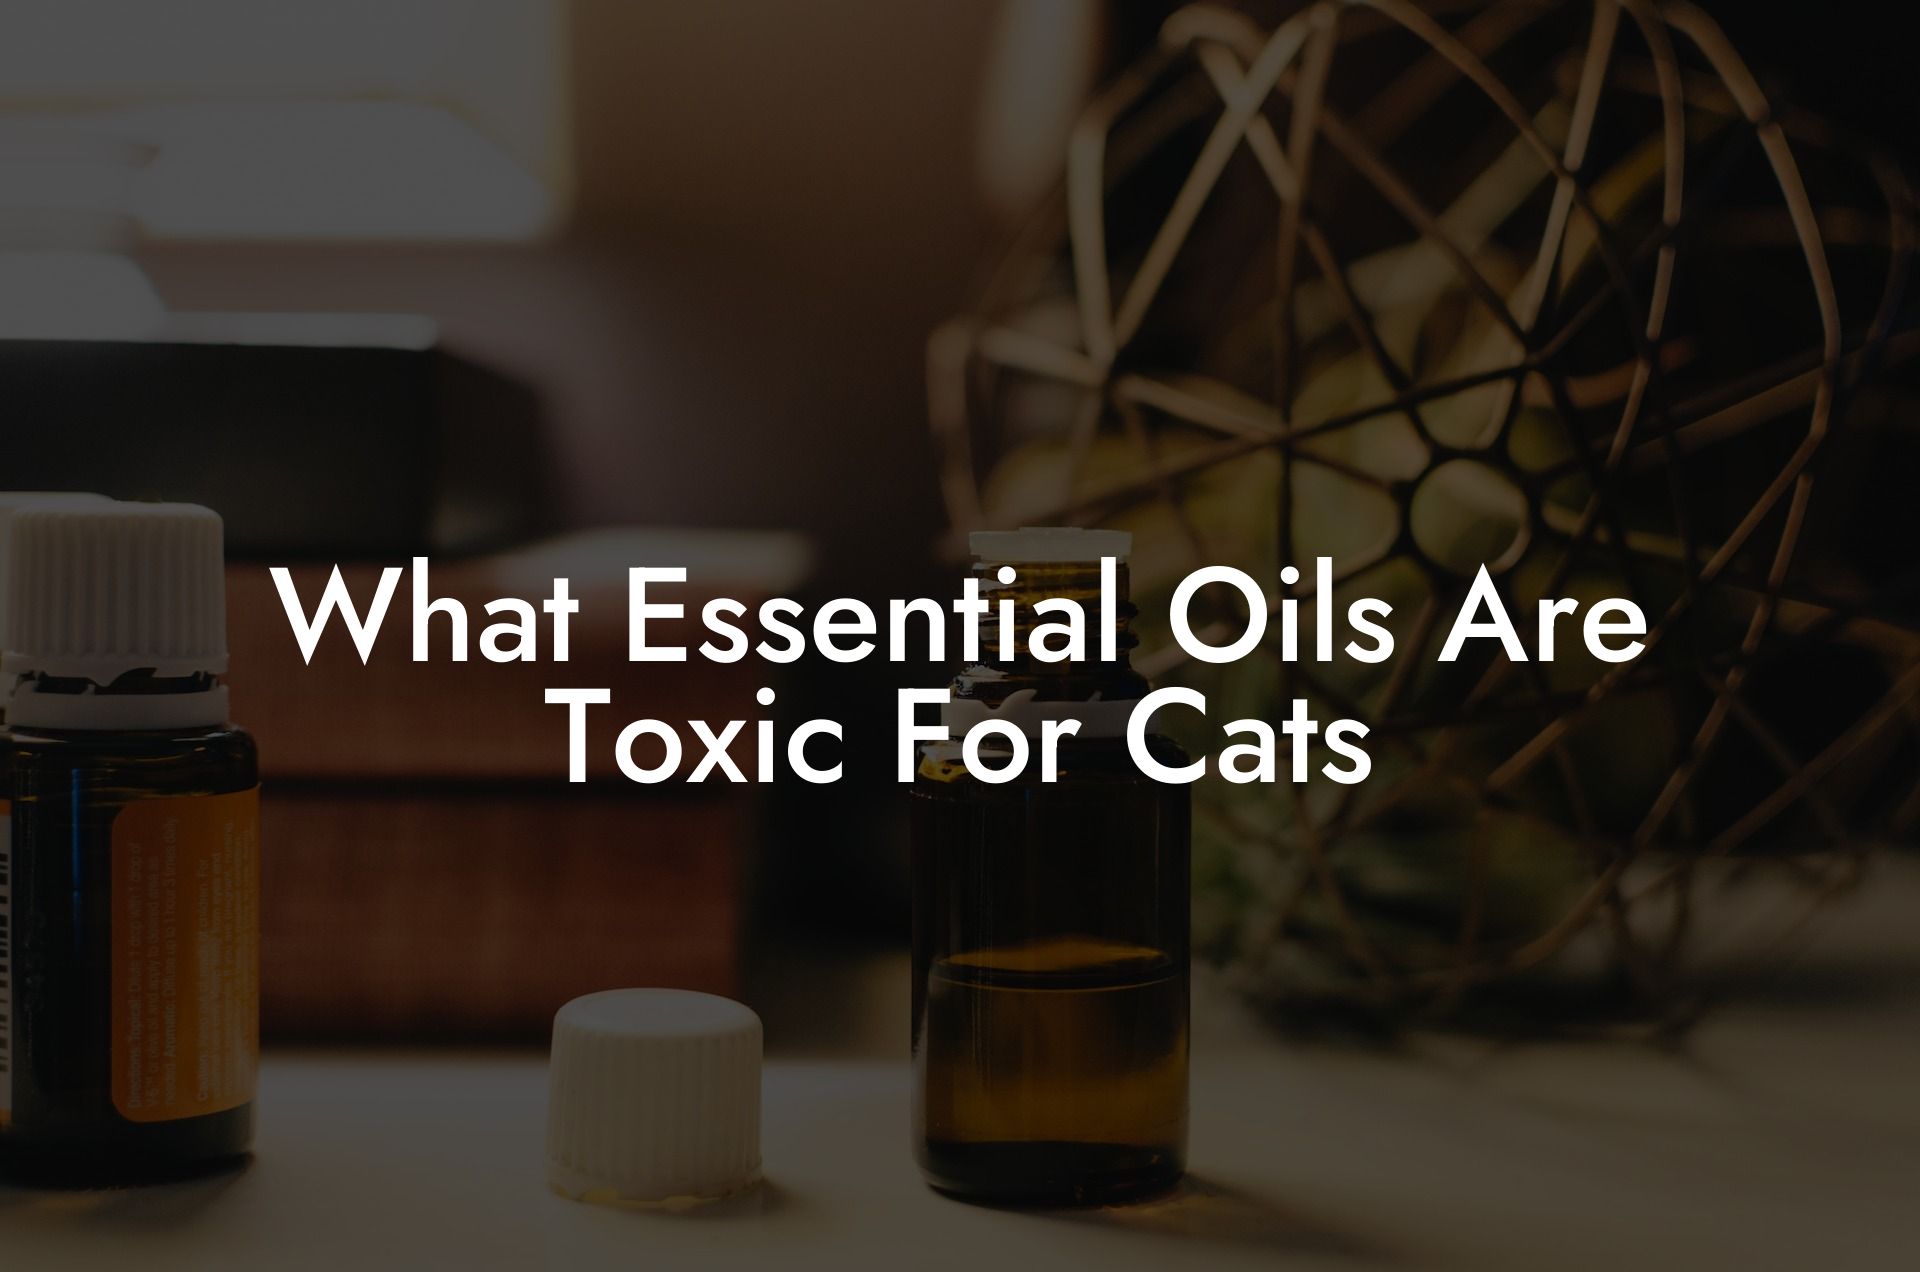 What Essential Oils Are Toxic For Cats